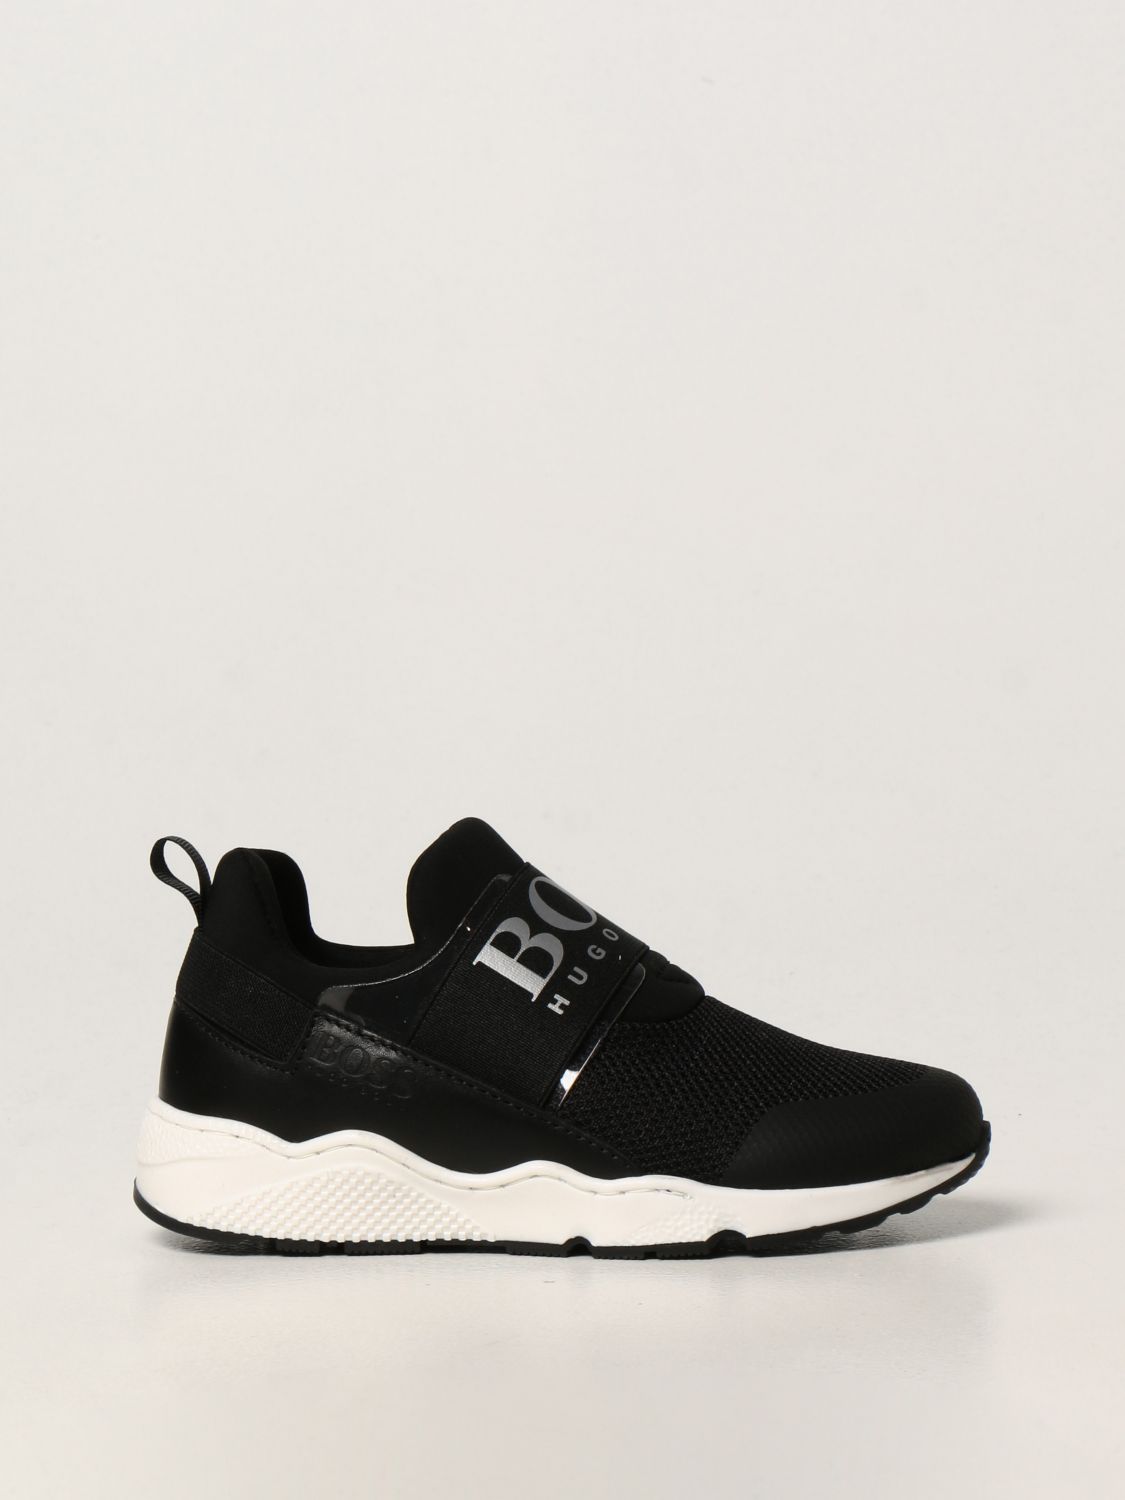 Inaccurate Roasted Sacrifice HUGO BOSS: slip on sneakers - Black | Hugo Boss shoes J29T93 online on  GIGLIO.COM